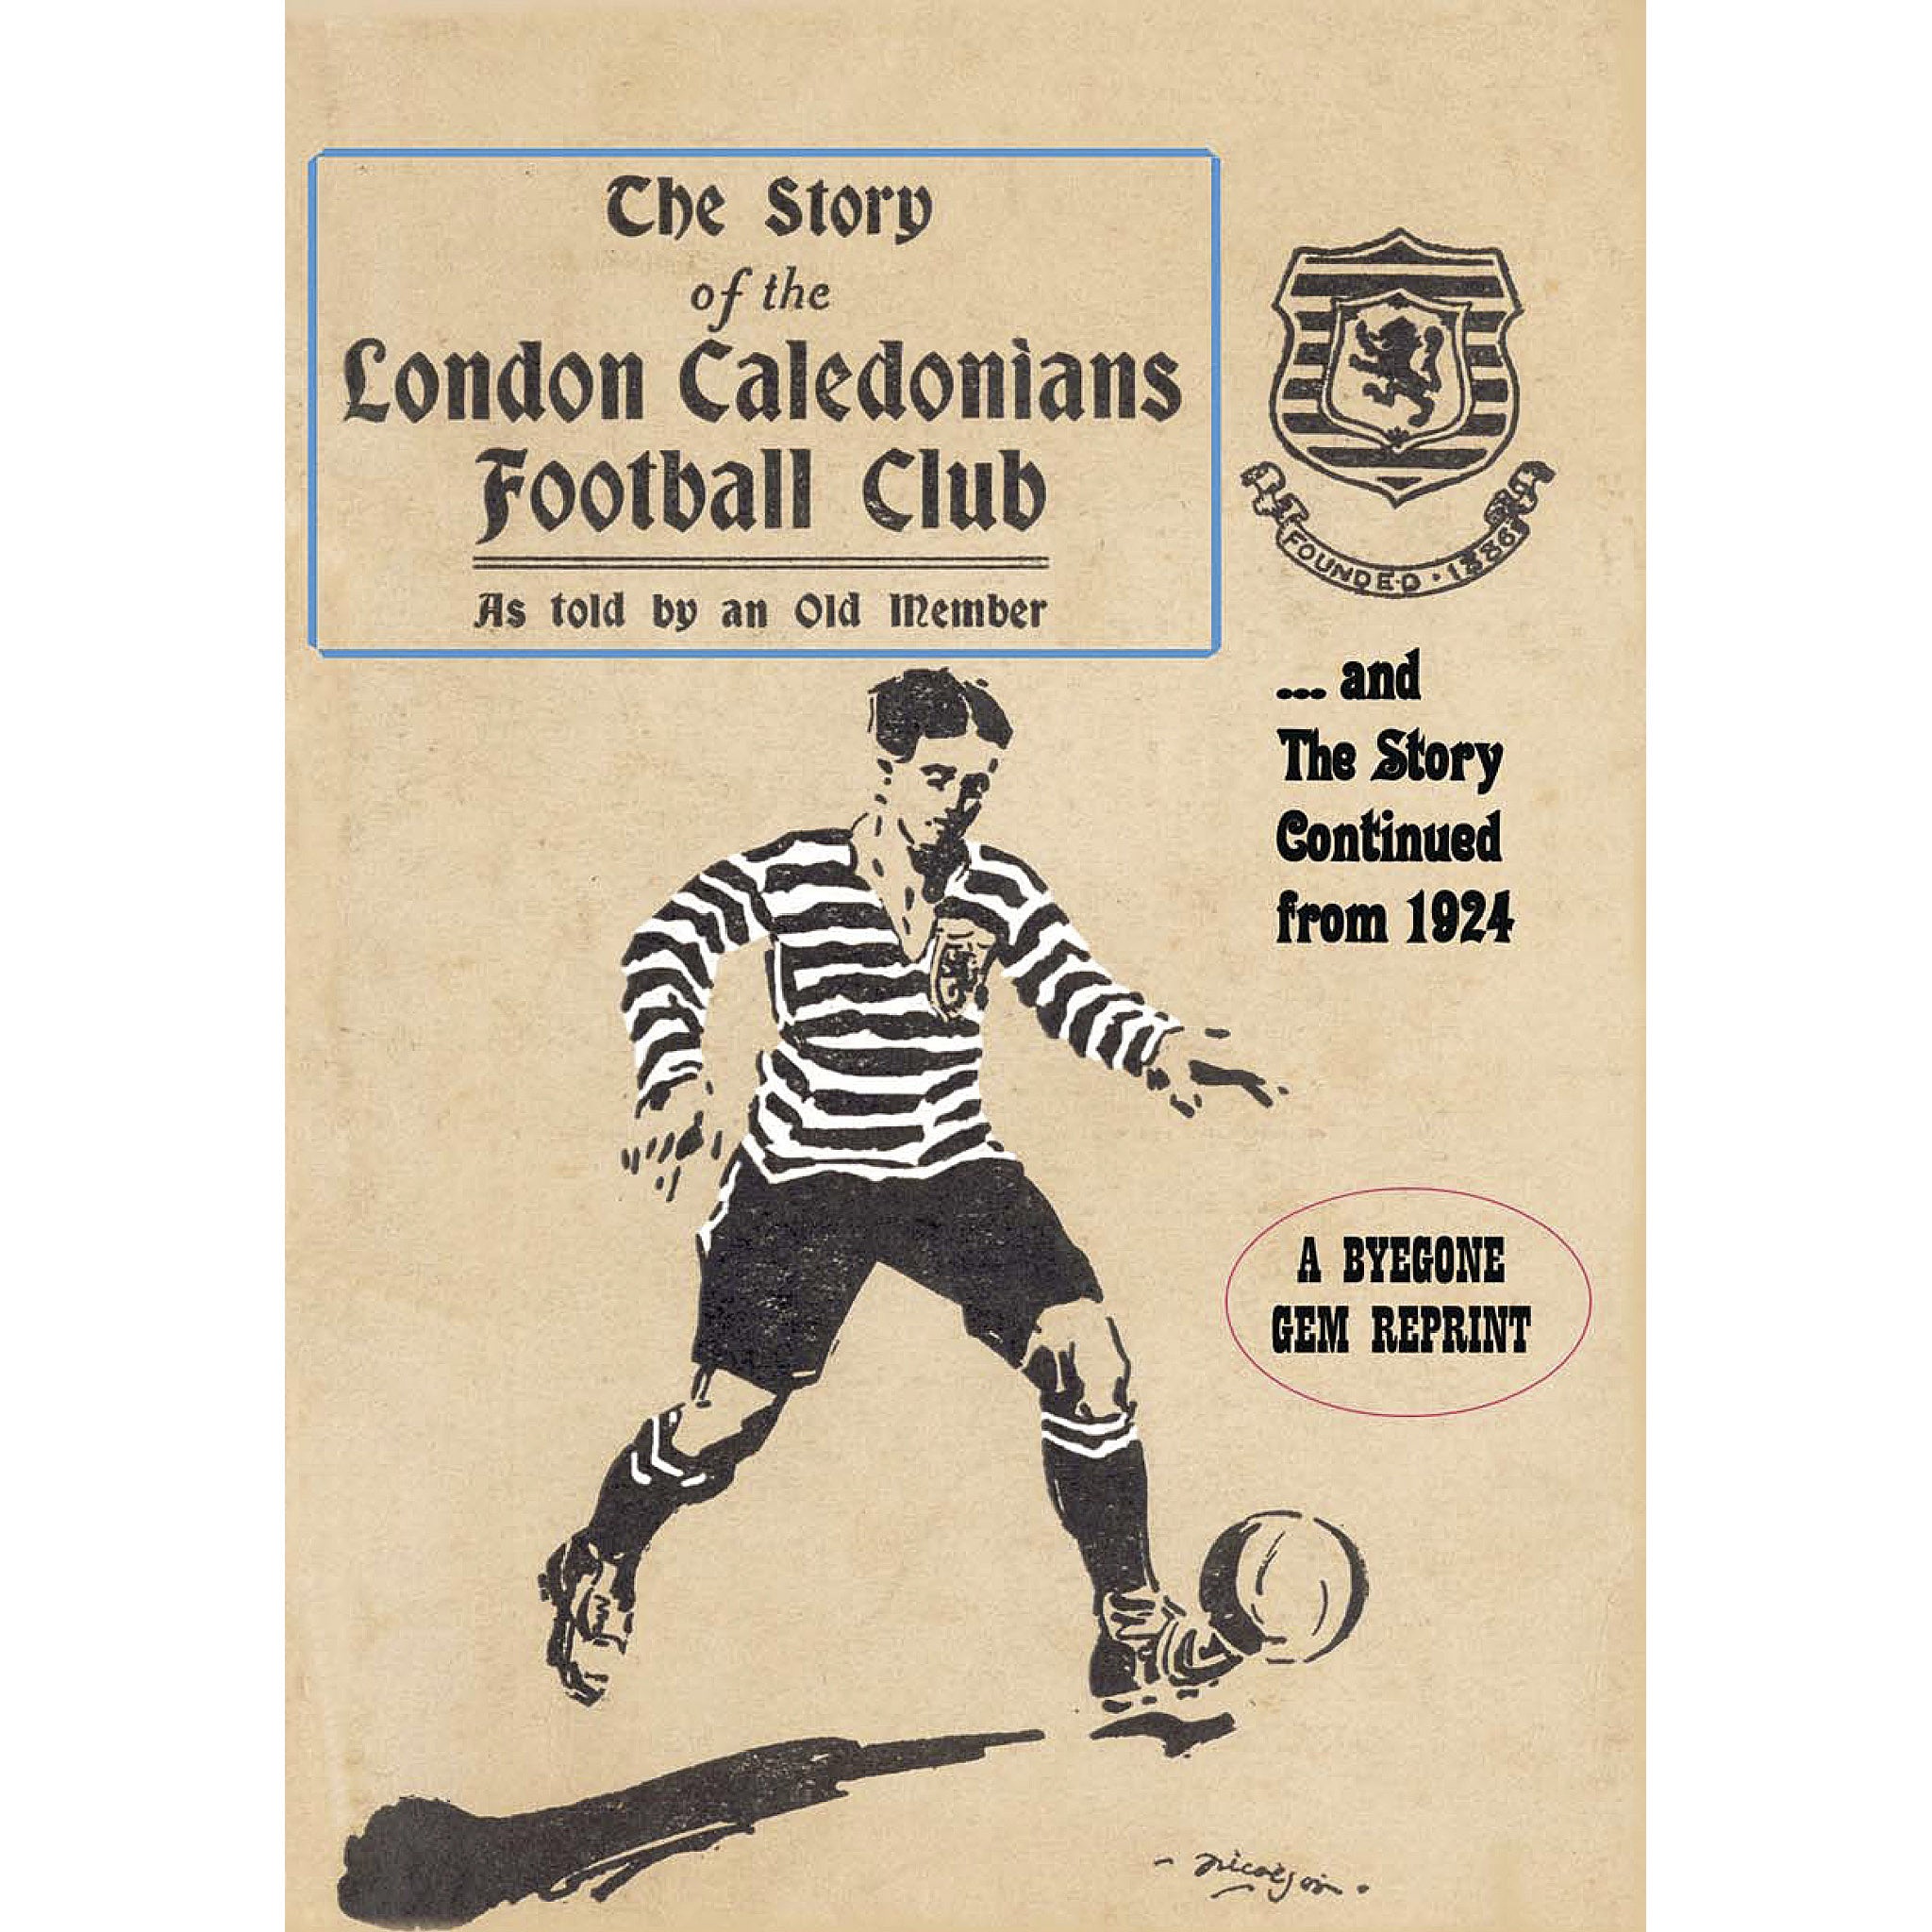 The Story of the London Caledonians Football Club